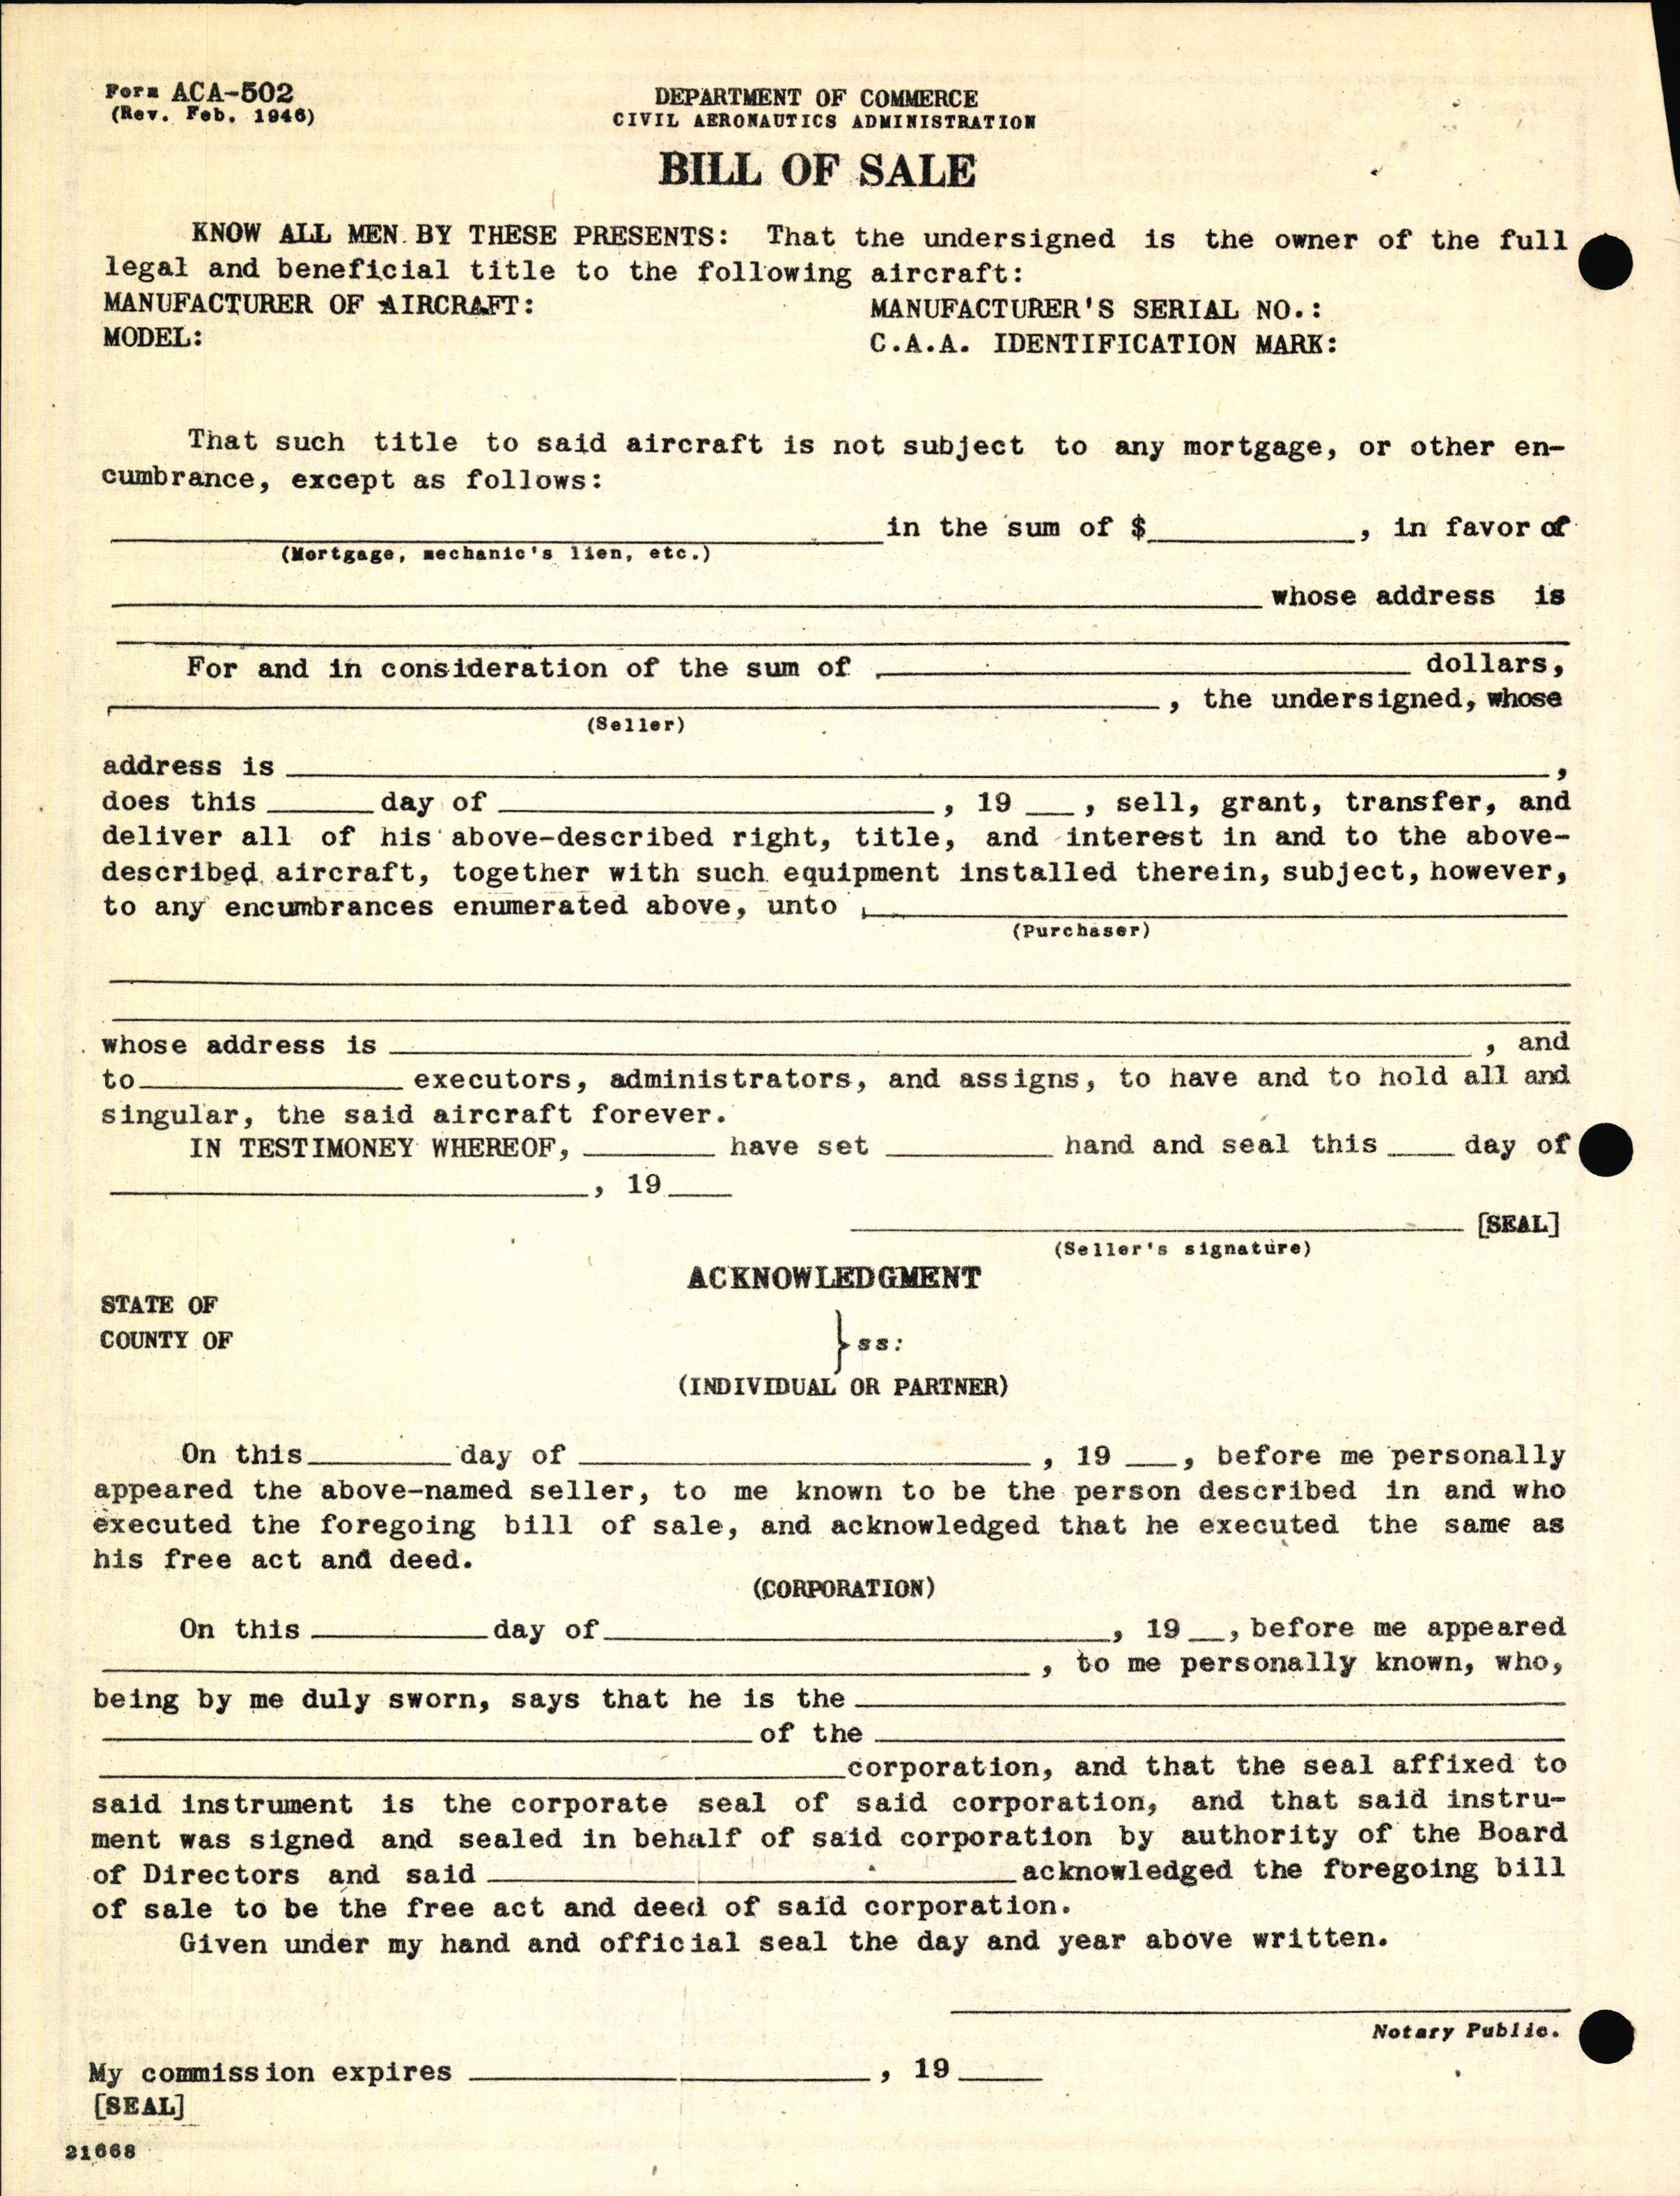 Sample page 4 from AirCorps Library document: Technical Information for Serial Number 2060